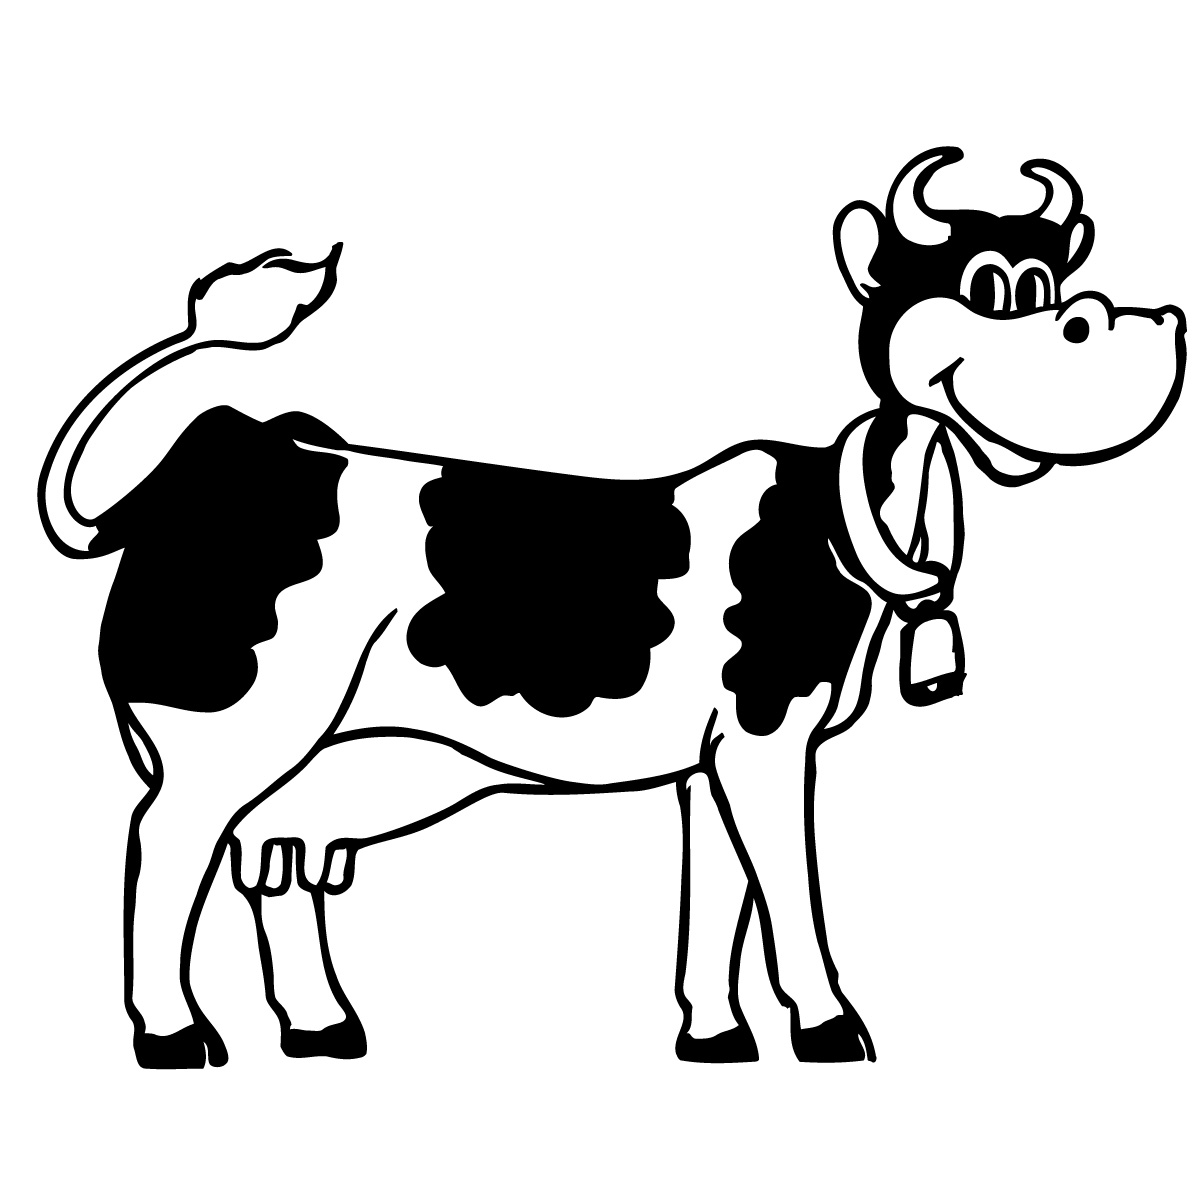 Cartoon Baby Cow Images & Pictures - Becuo